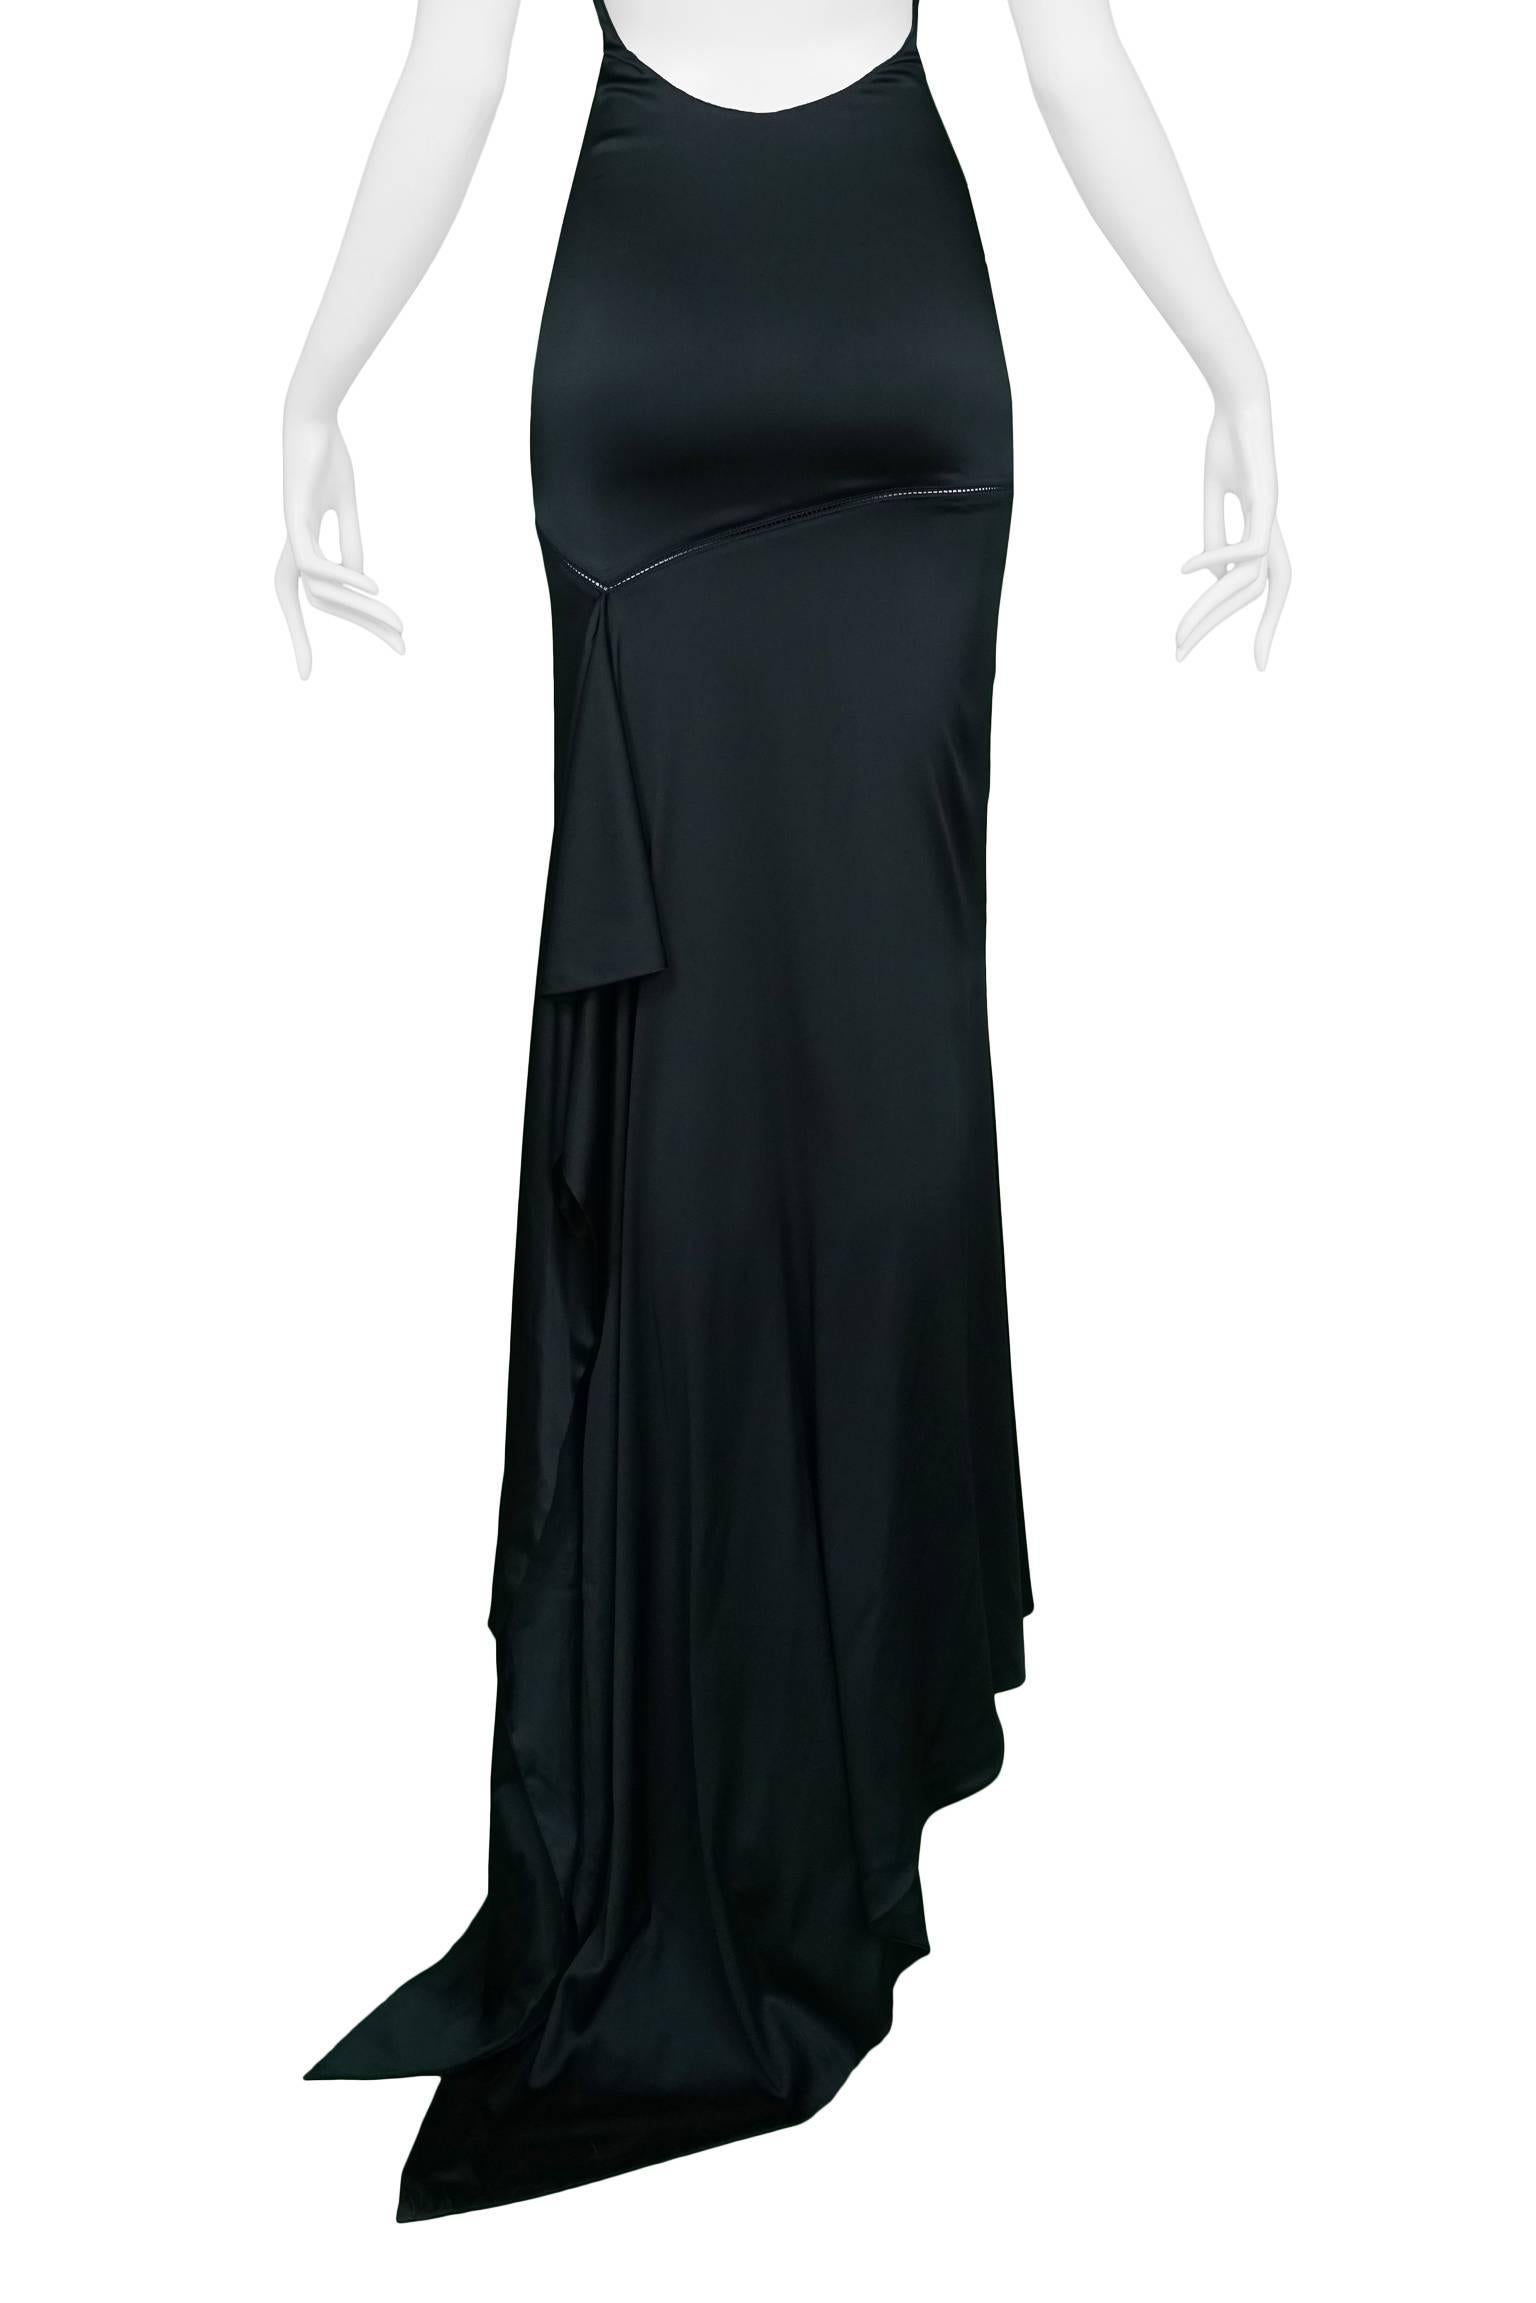 Women's Tom Ford for Gucci Dark Green Satin Backless Evening Gown